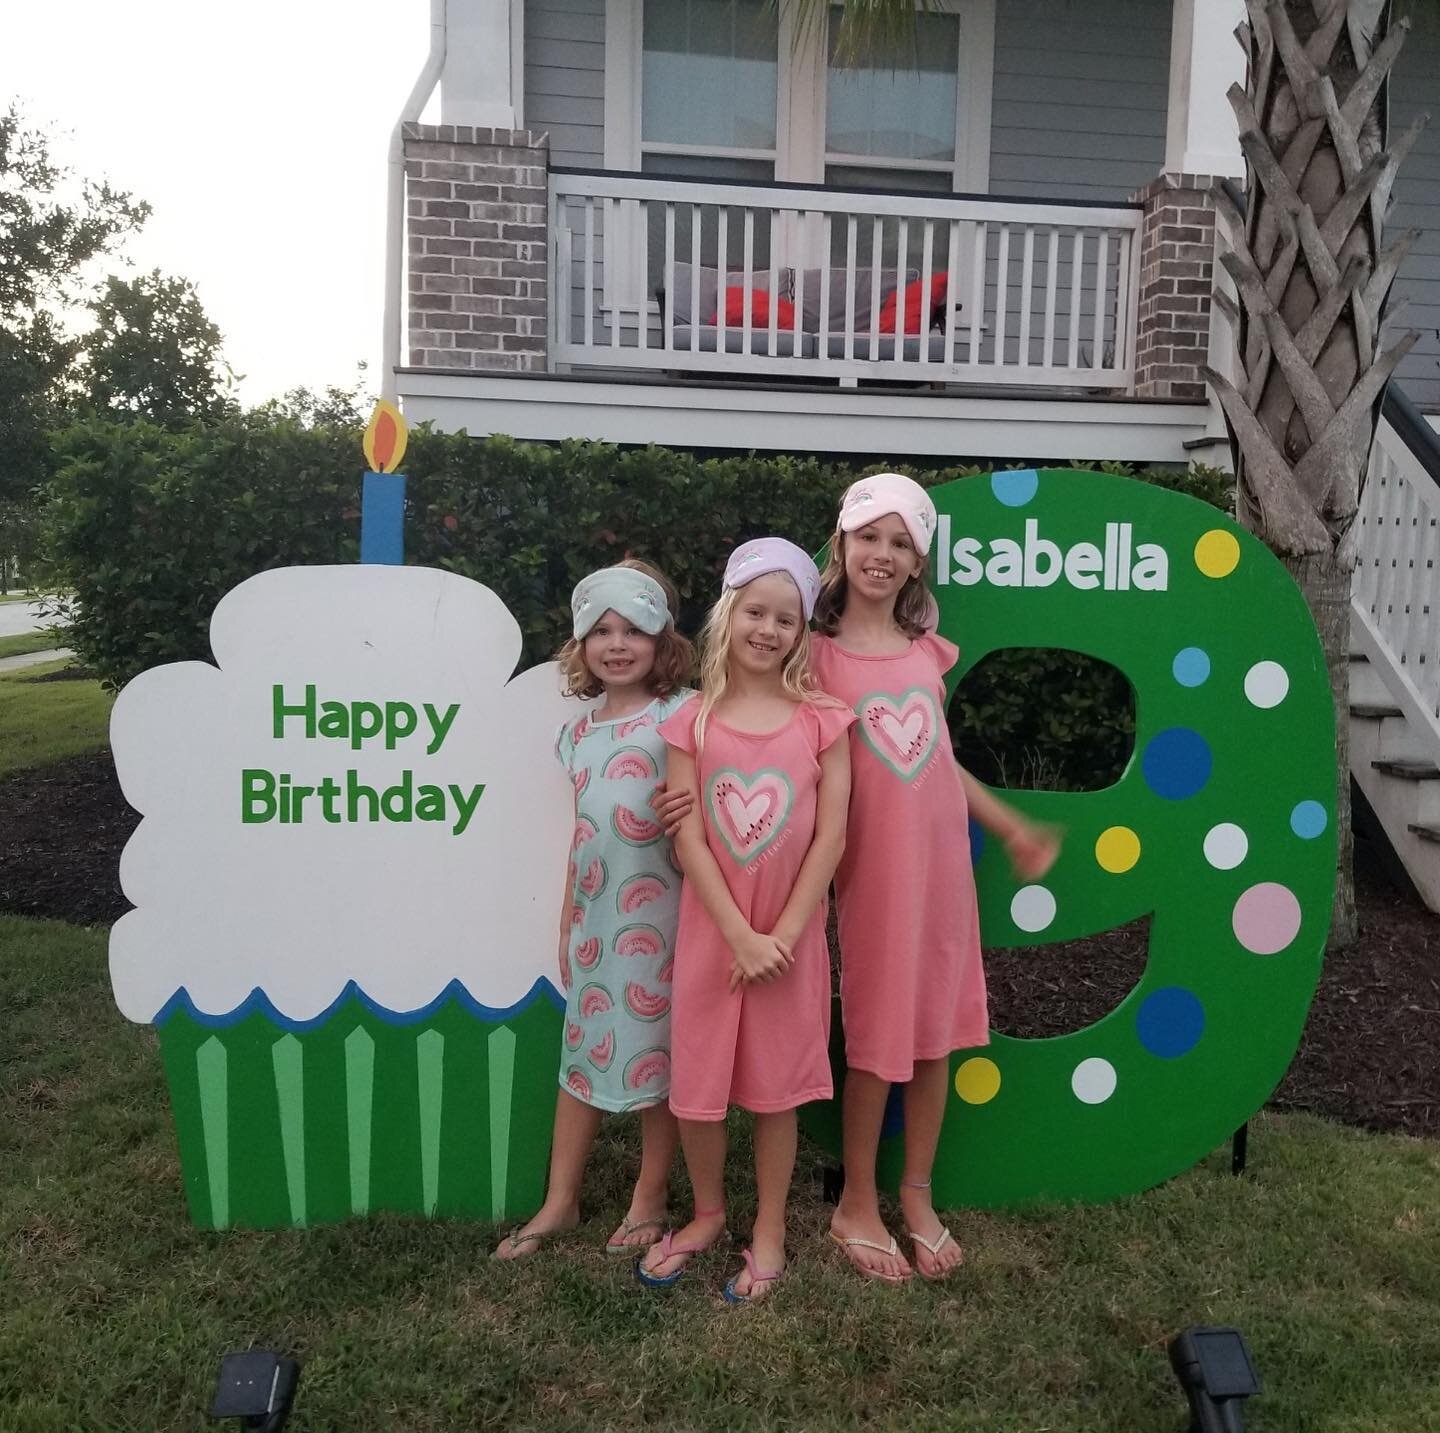 It&rsquo;s a sleepover for Isabella&rsquo;s birthday! Happy birthday!

To order click the link in our bio or text 843-345-3501

#sassysignschs #charlestonyardsigns #9thbirthday #sleepoverparty #sleepover #danielisland #happybirthday